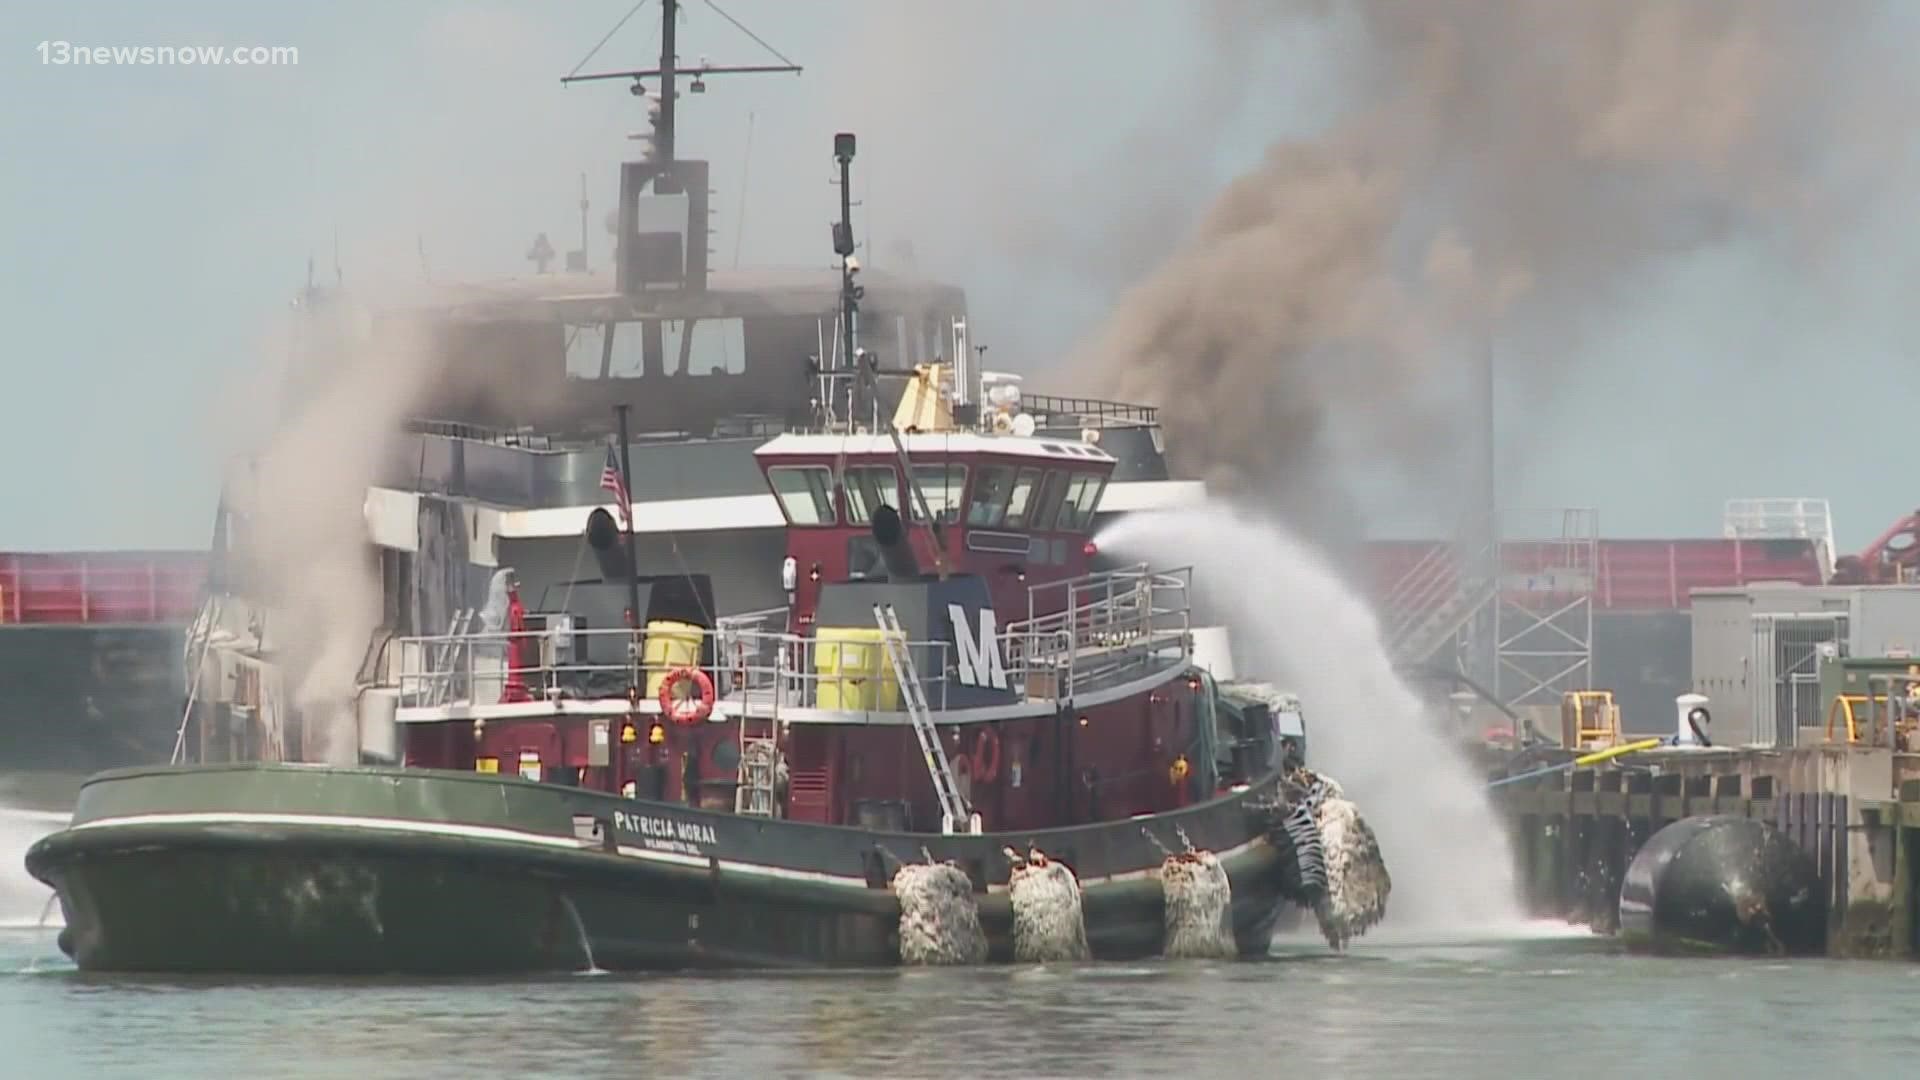 The US Coast Guard began a series of formal hearings examining the fire that destroyed the Spirit of Norfolk over the summer.